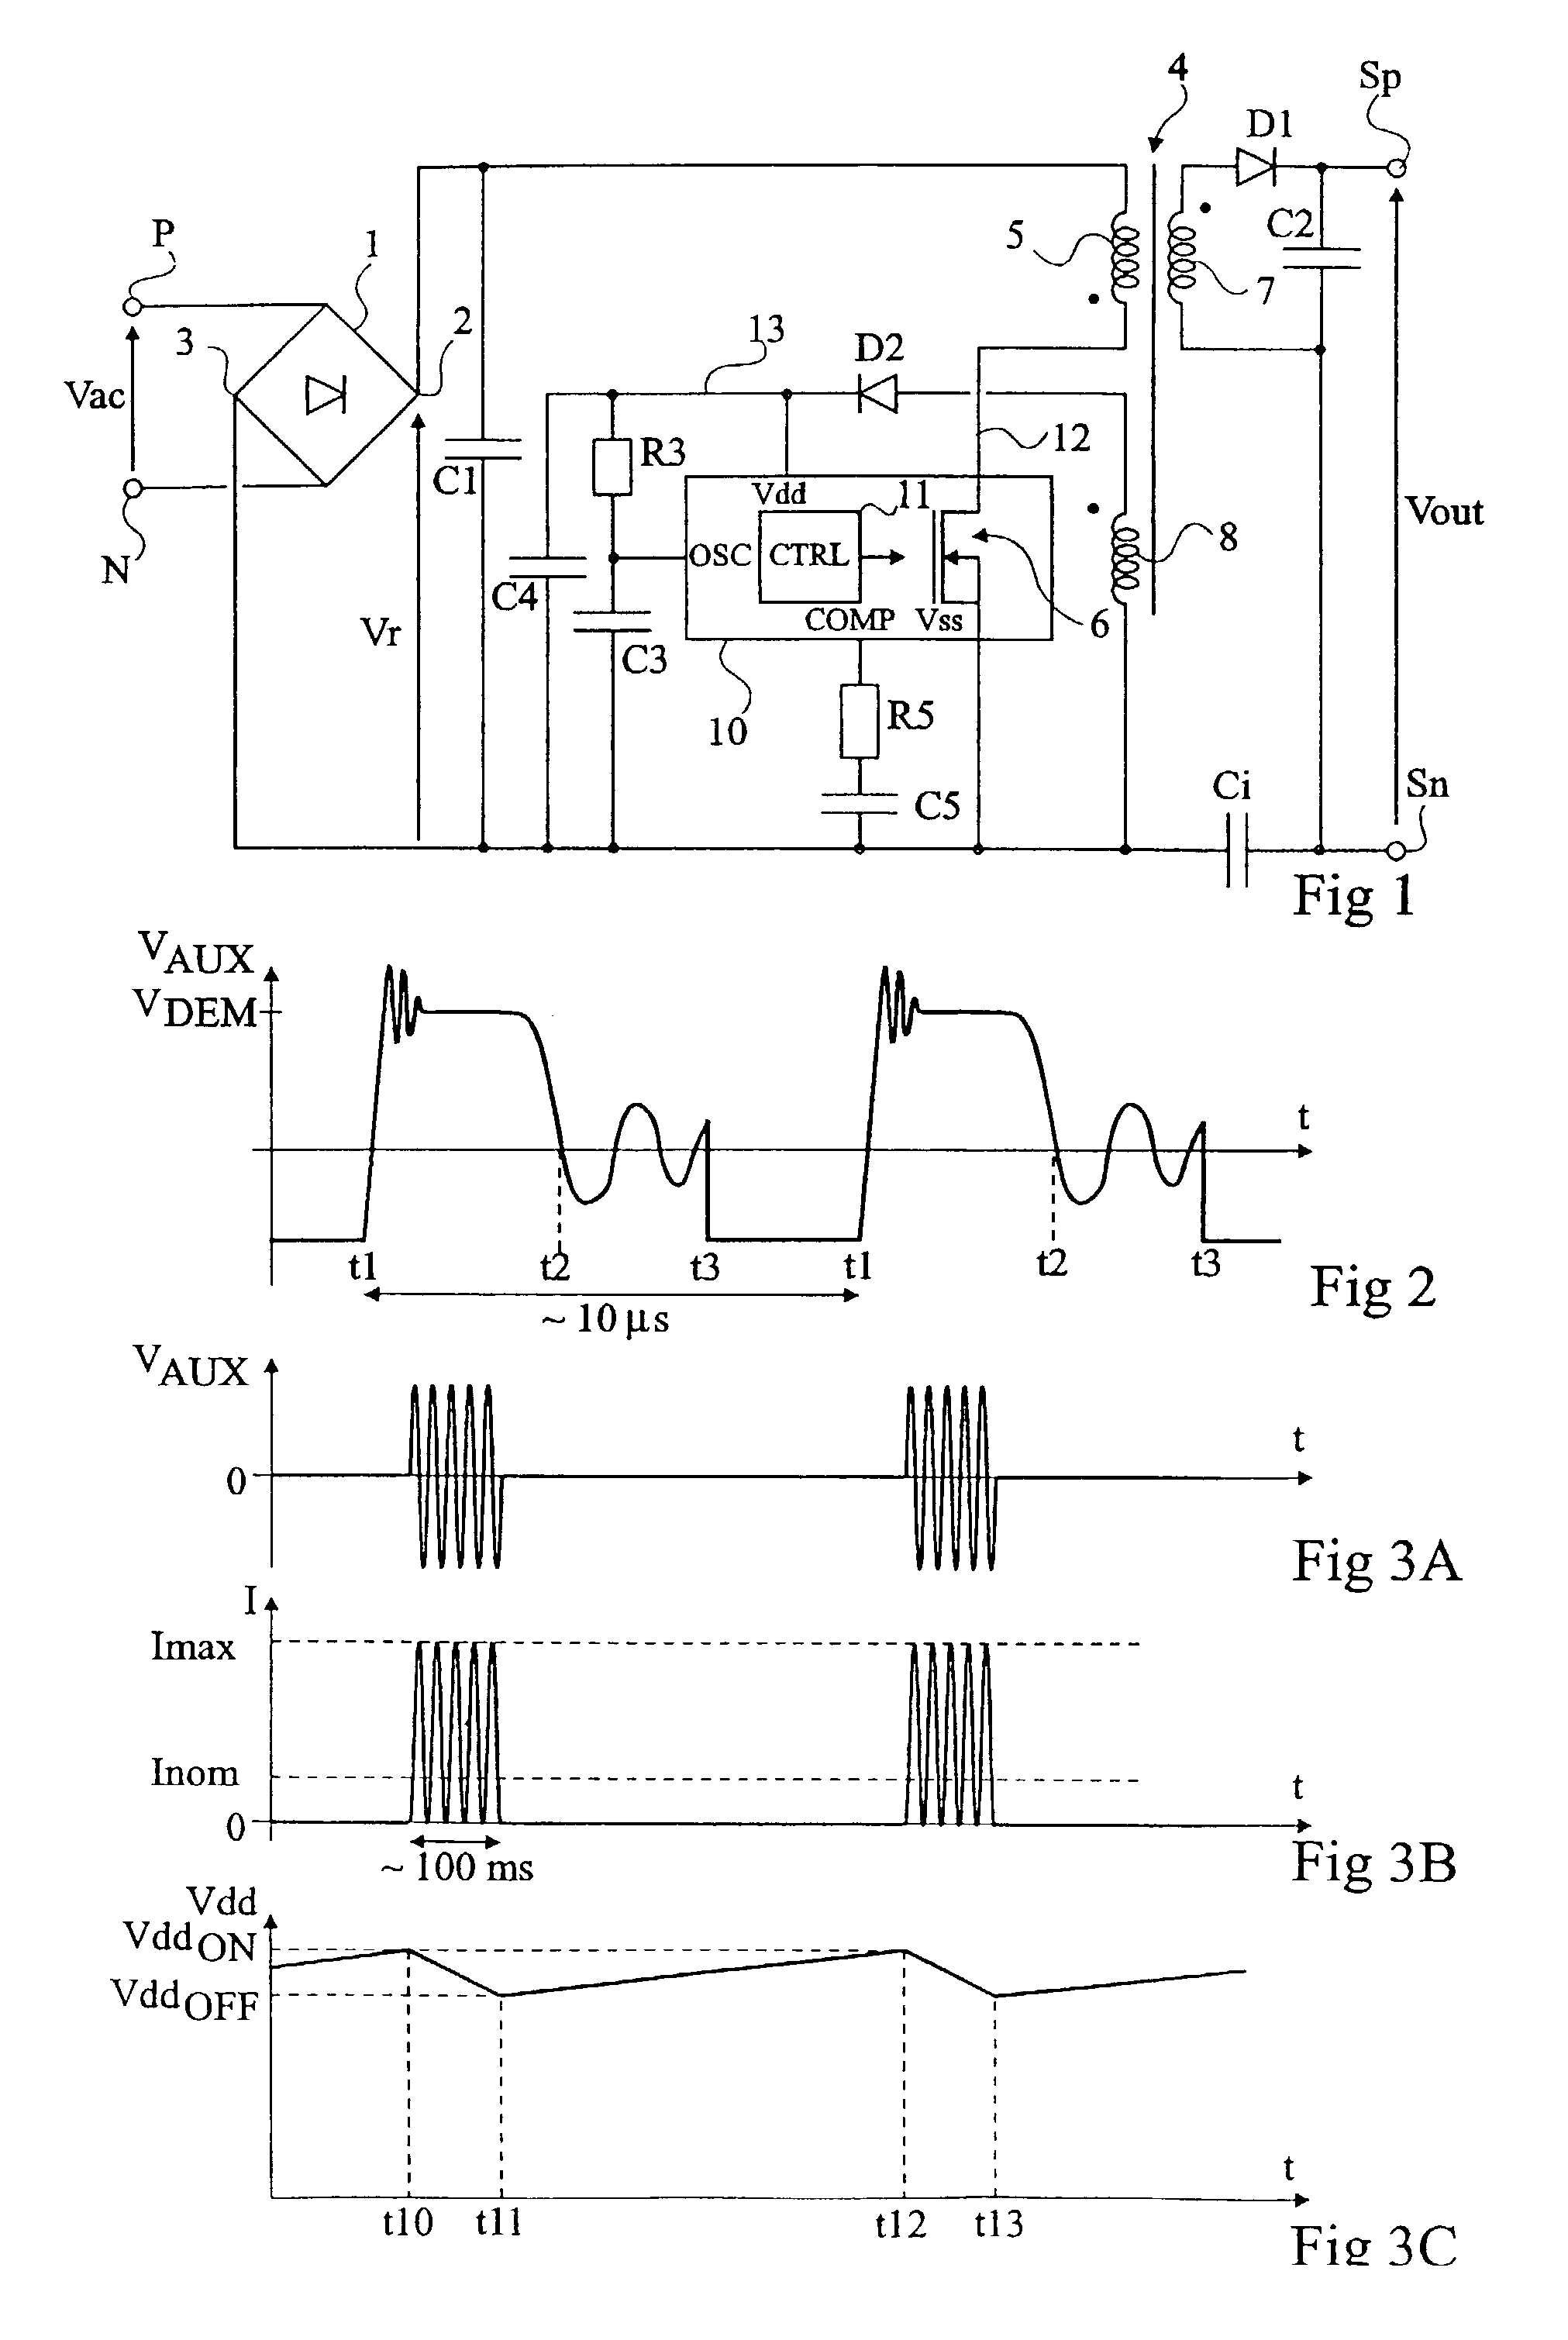 Limiting the continuous mode of a power converter